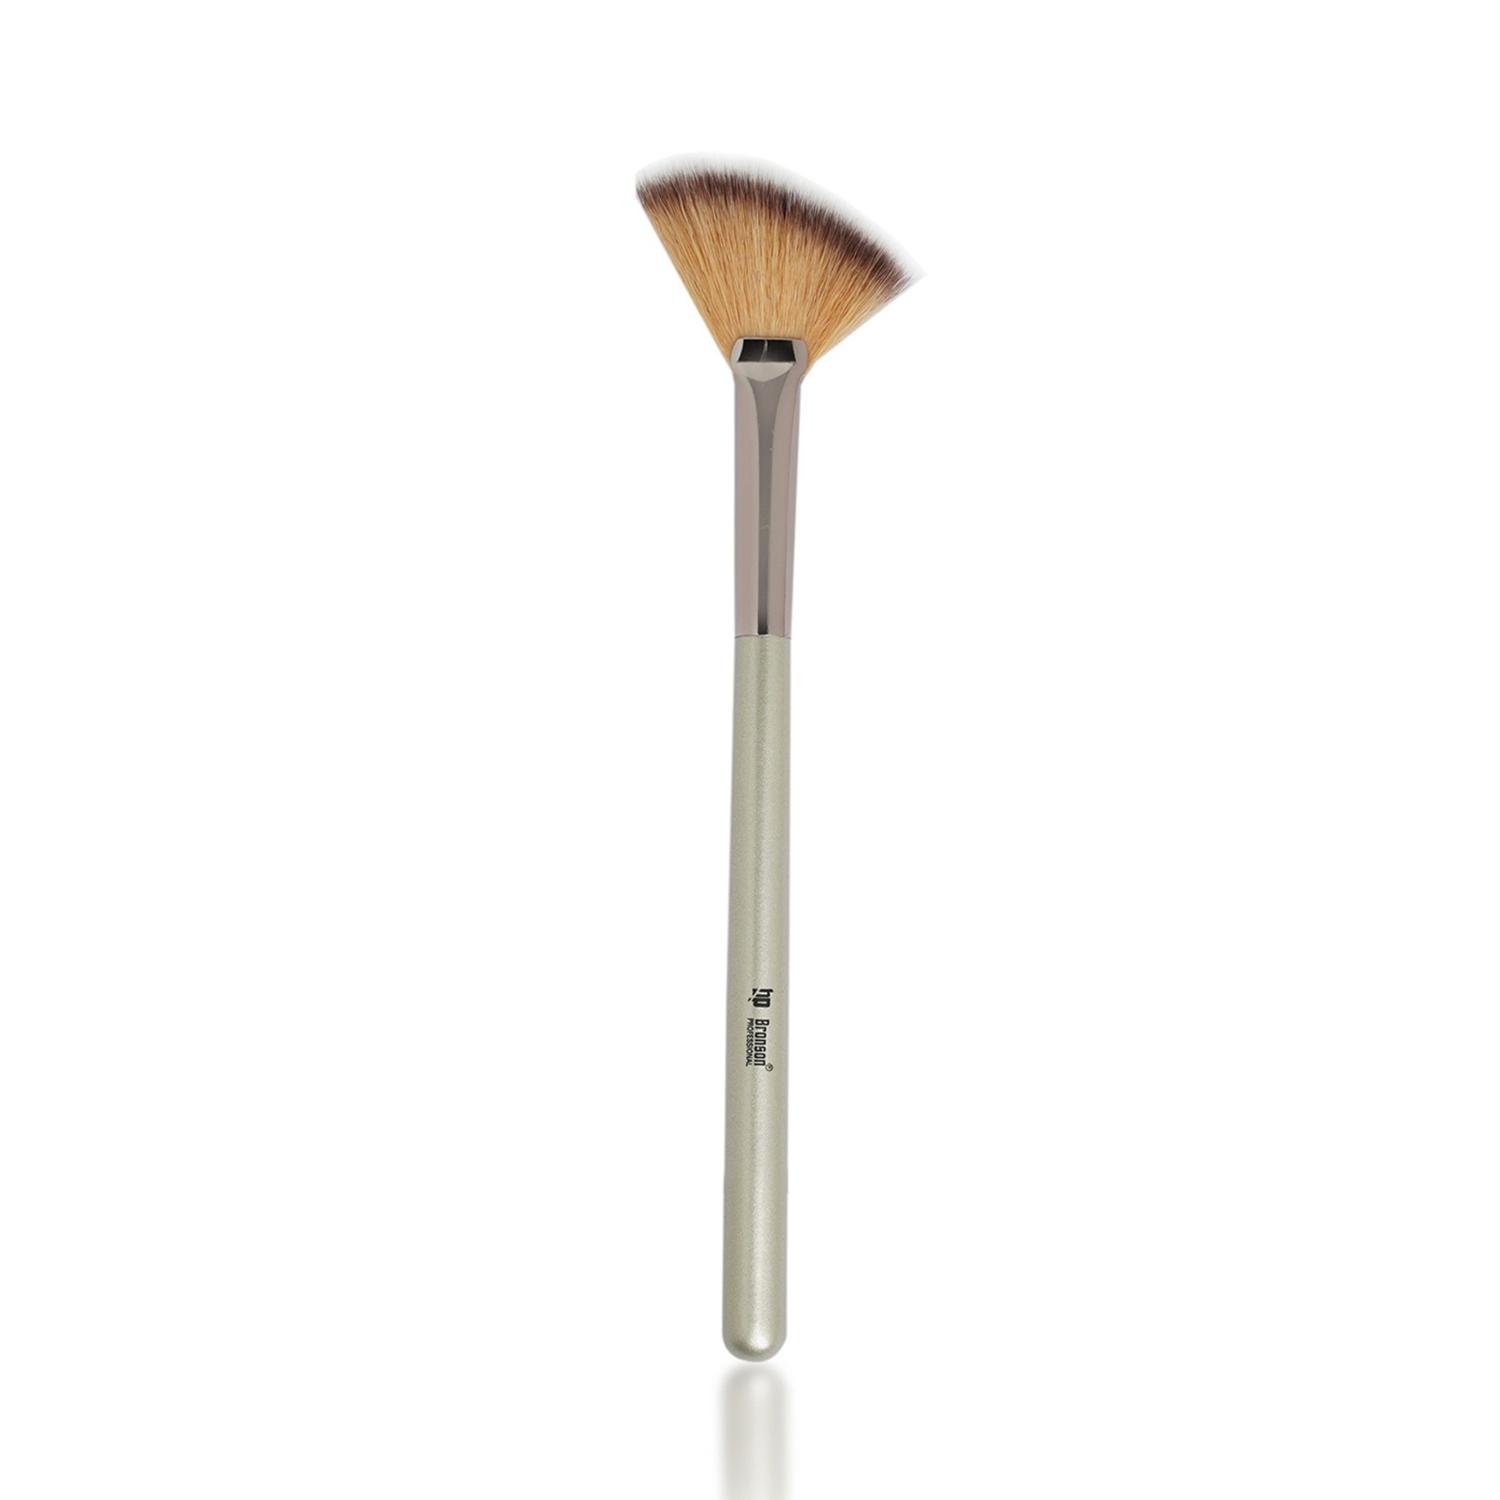 Bronson Professional | Bronson Professional Classic Angled Fan Makeup Brush - Silver, Pink